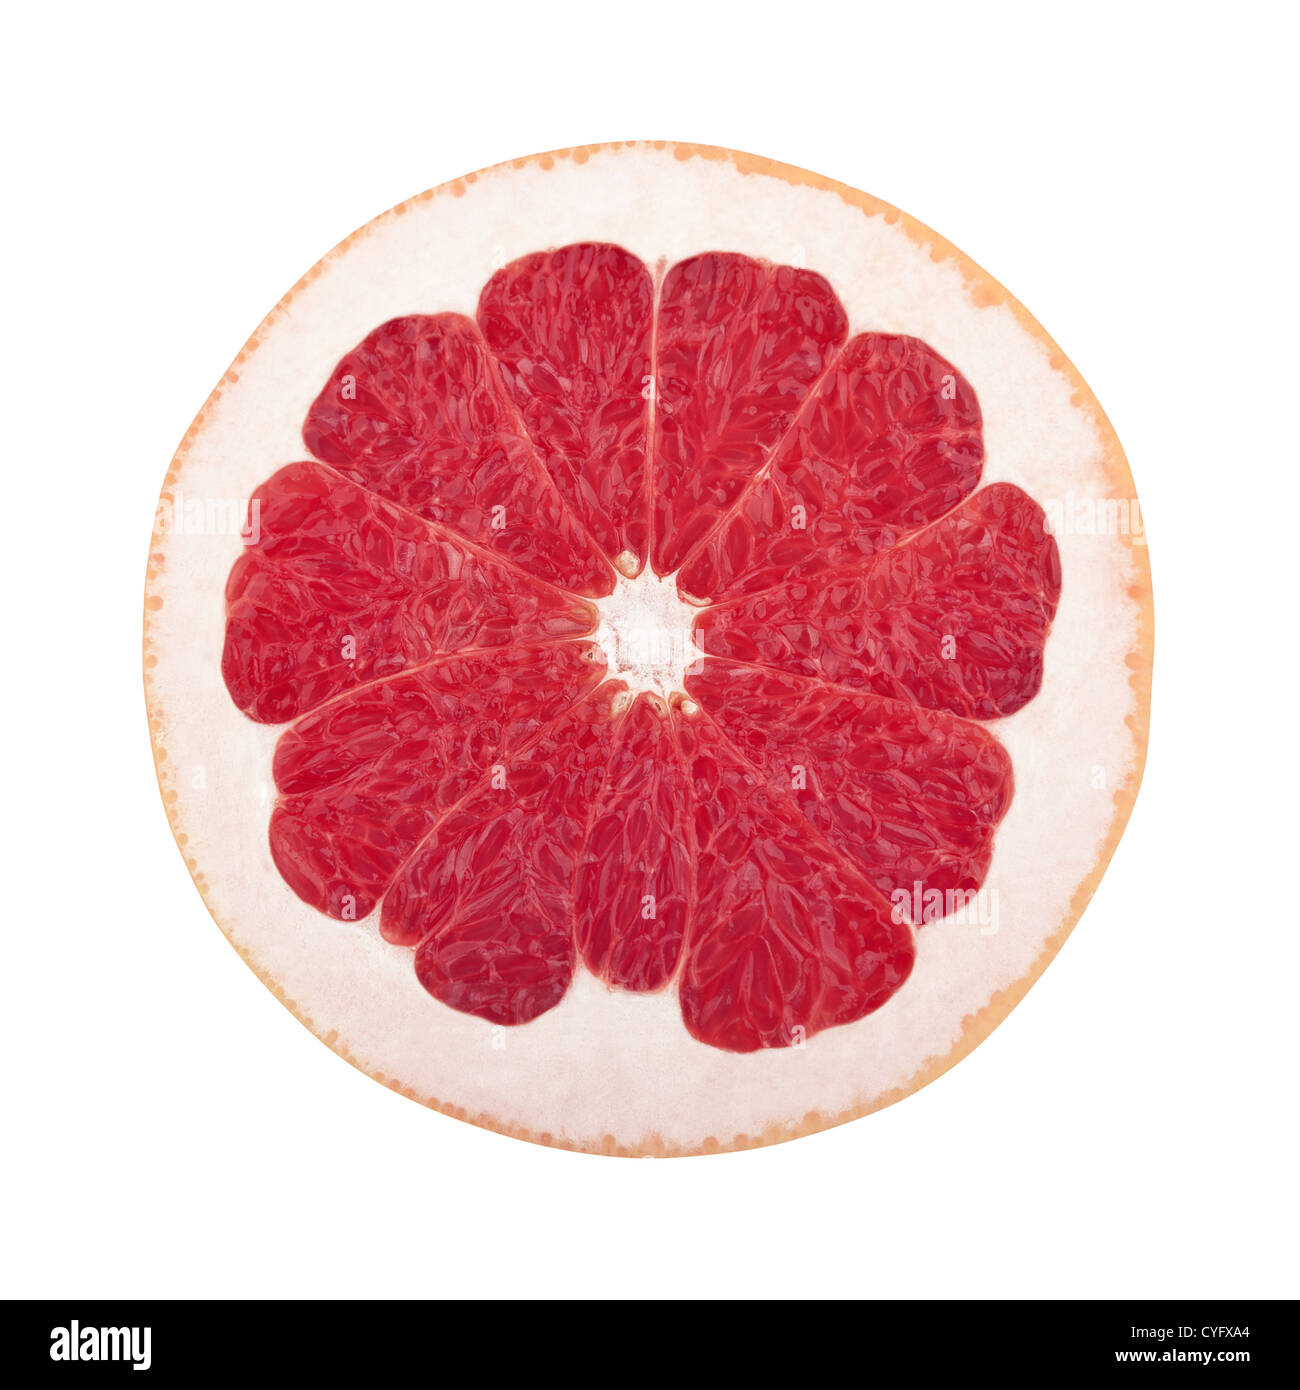 Slice of fresh juicy grapefruit with a thick rind Stock Photo